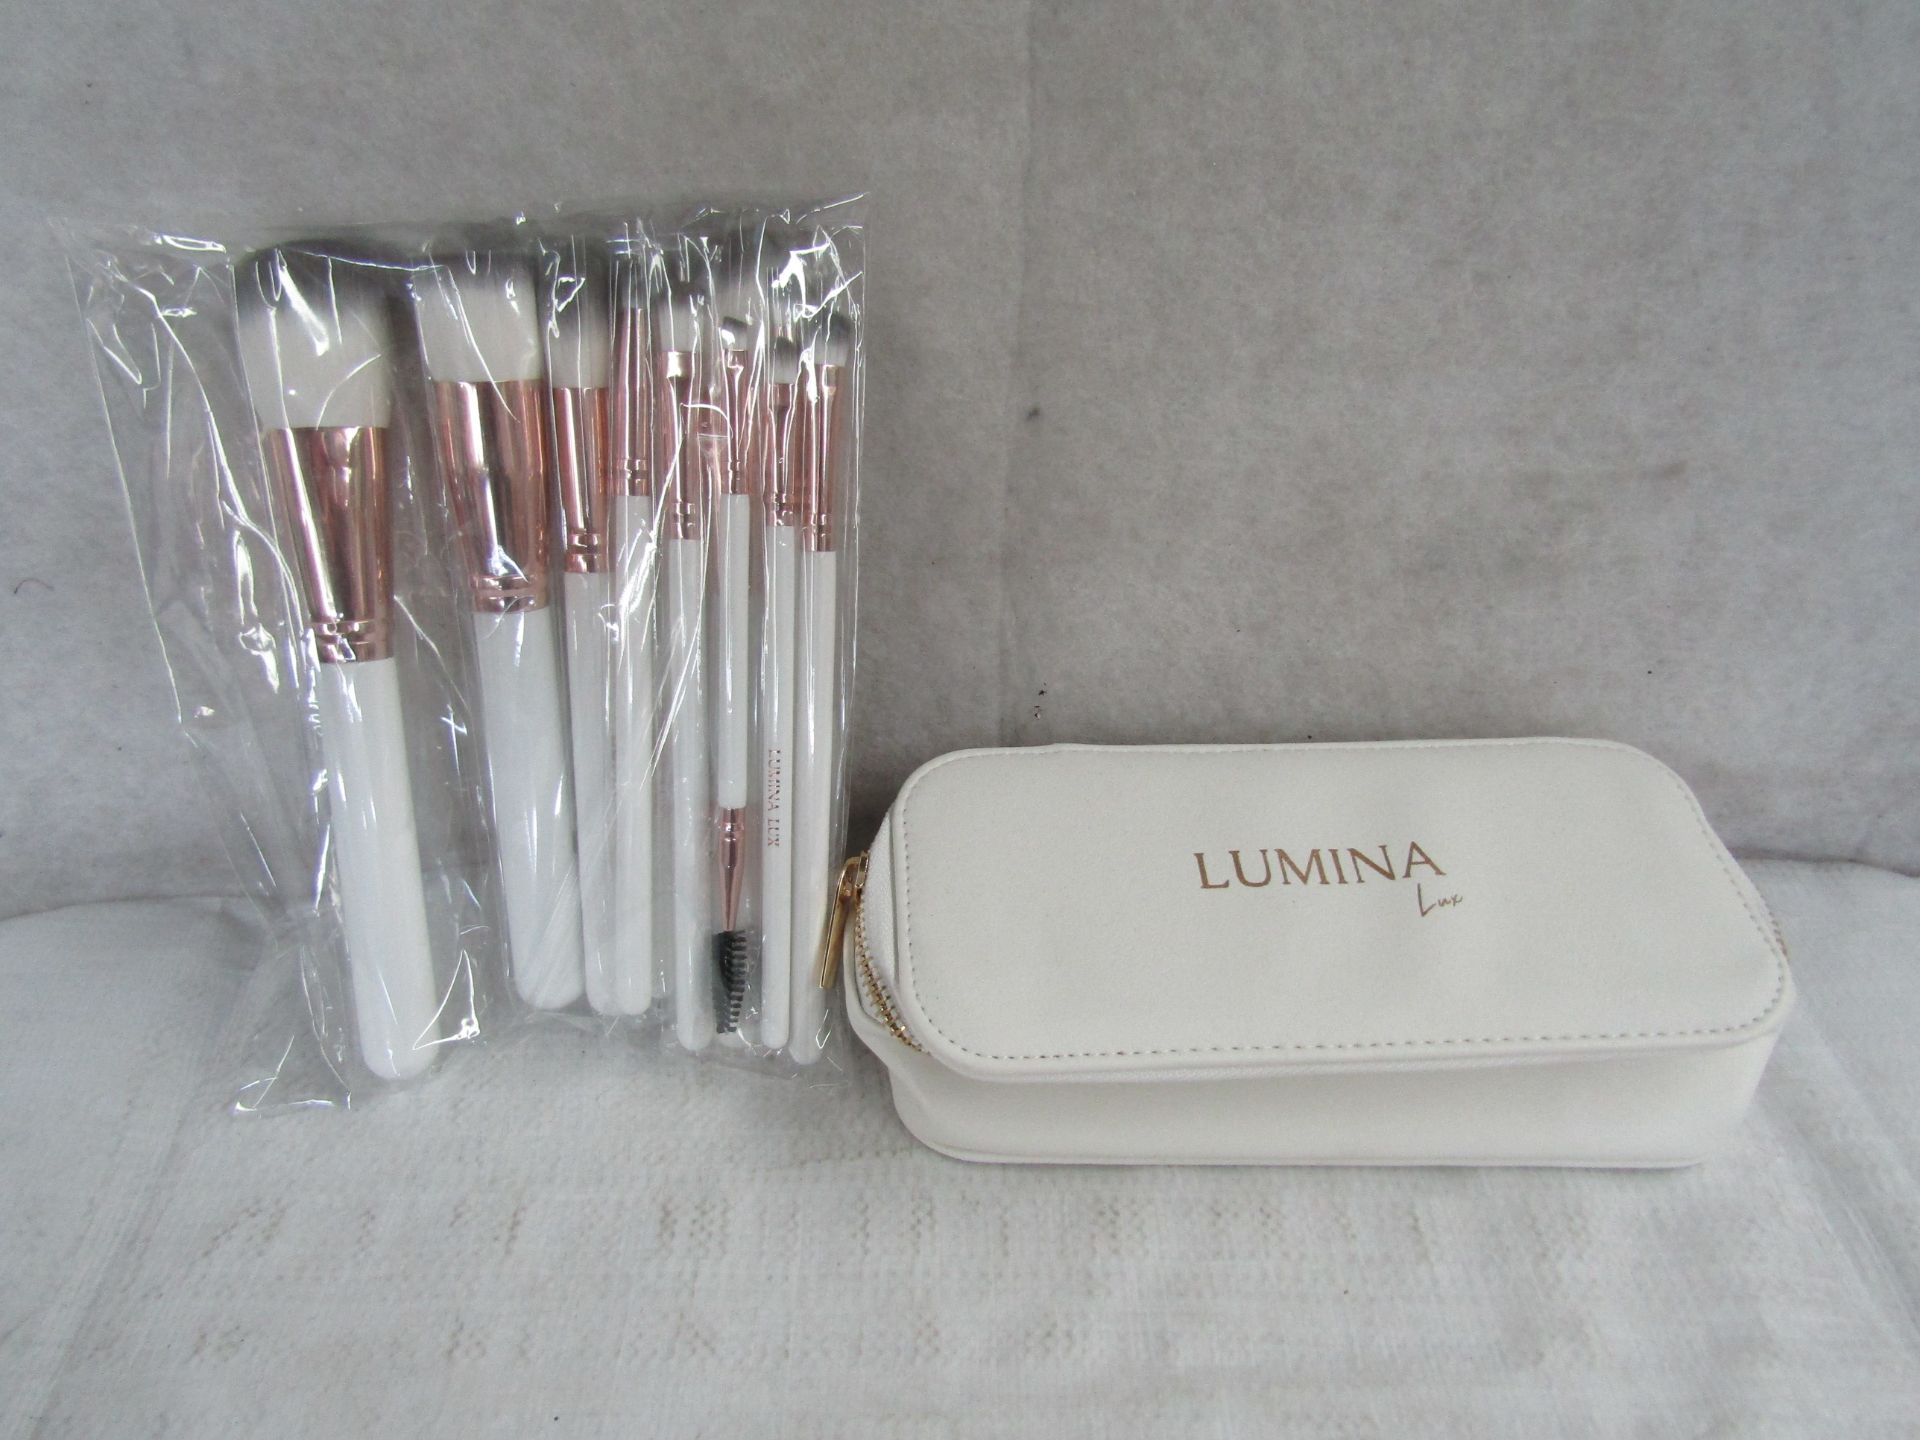 10x Lumina Lux 12 piece Brush set and carry case, new